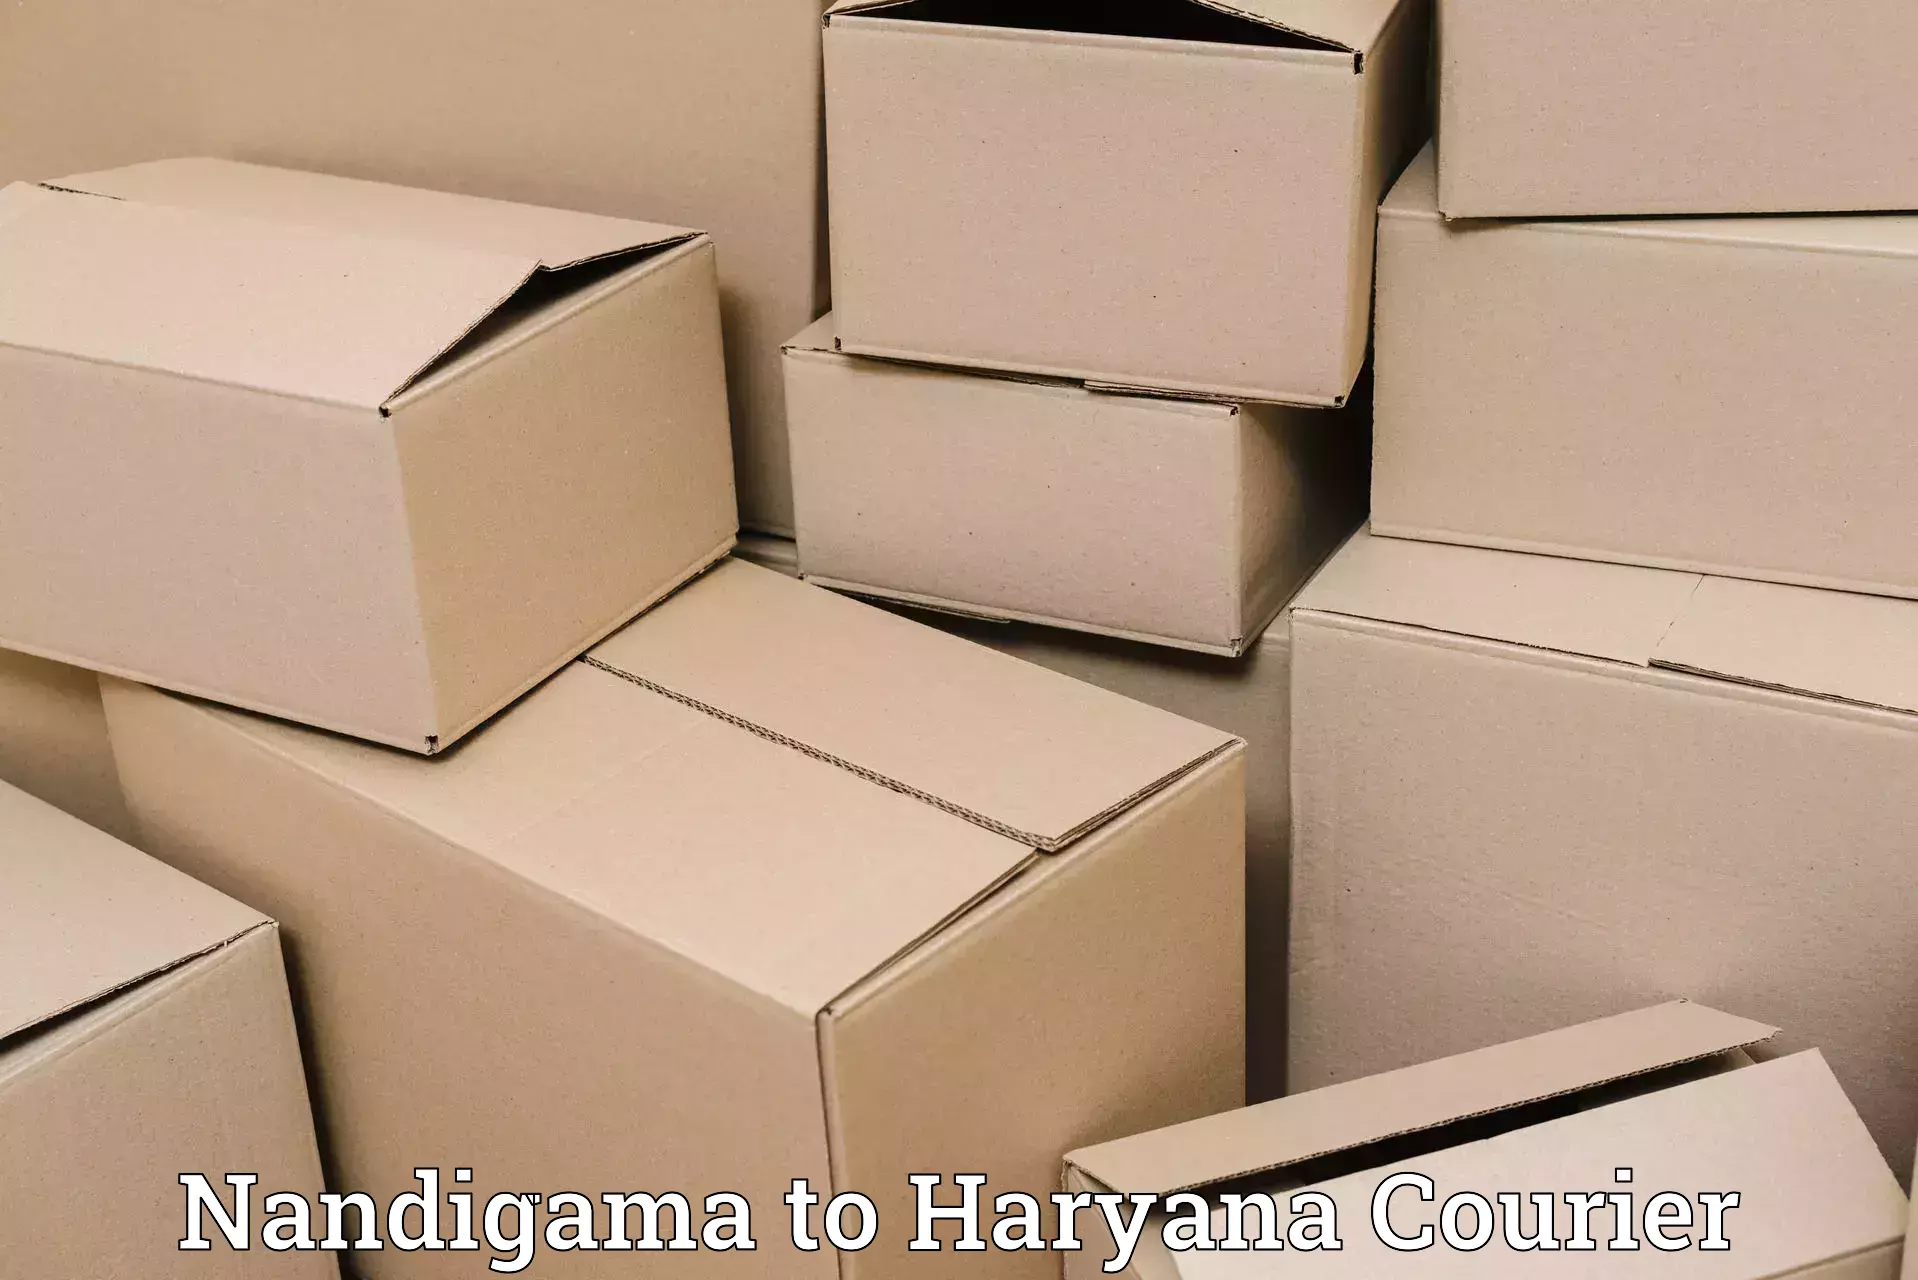 Express delivery network Nandigama to NCR Haryana